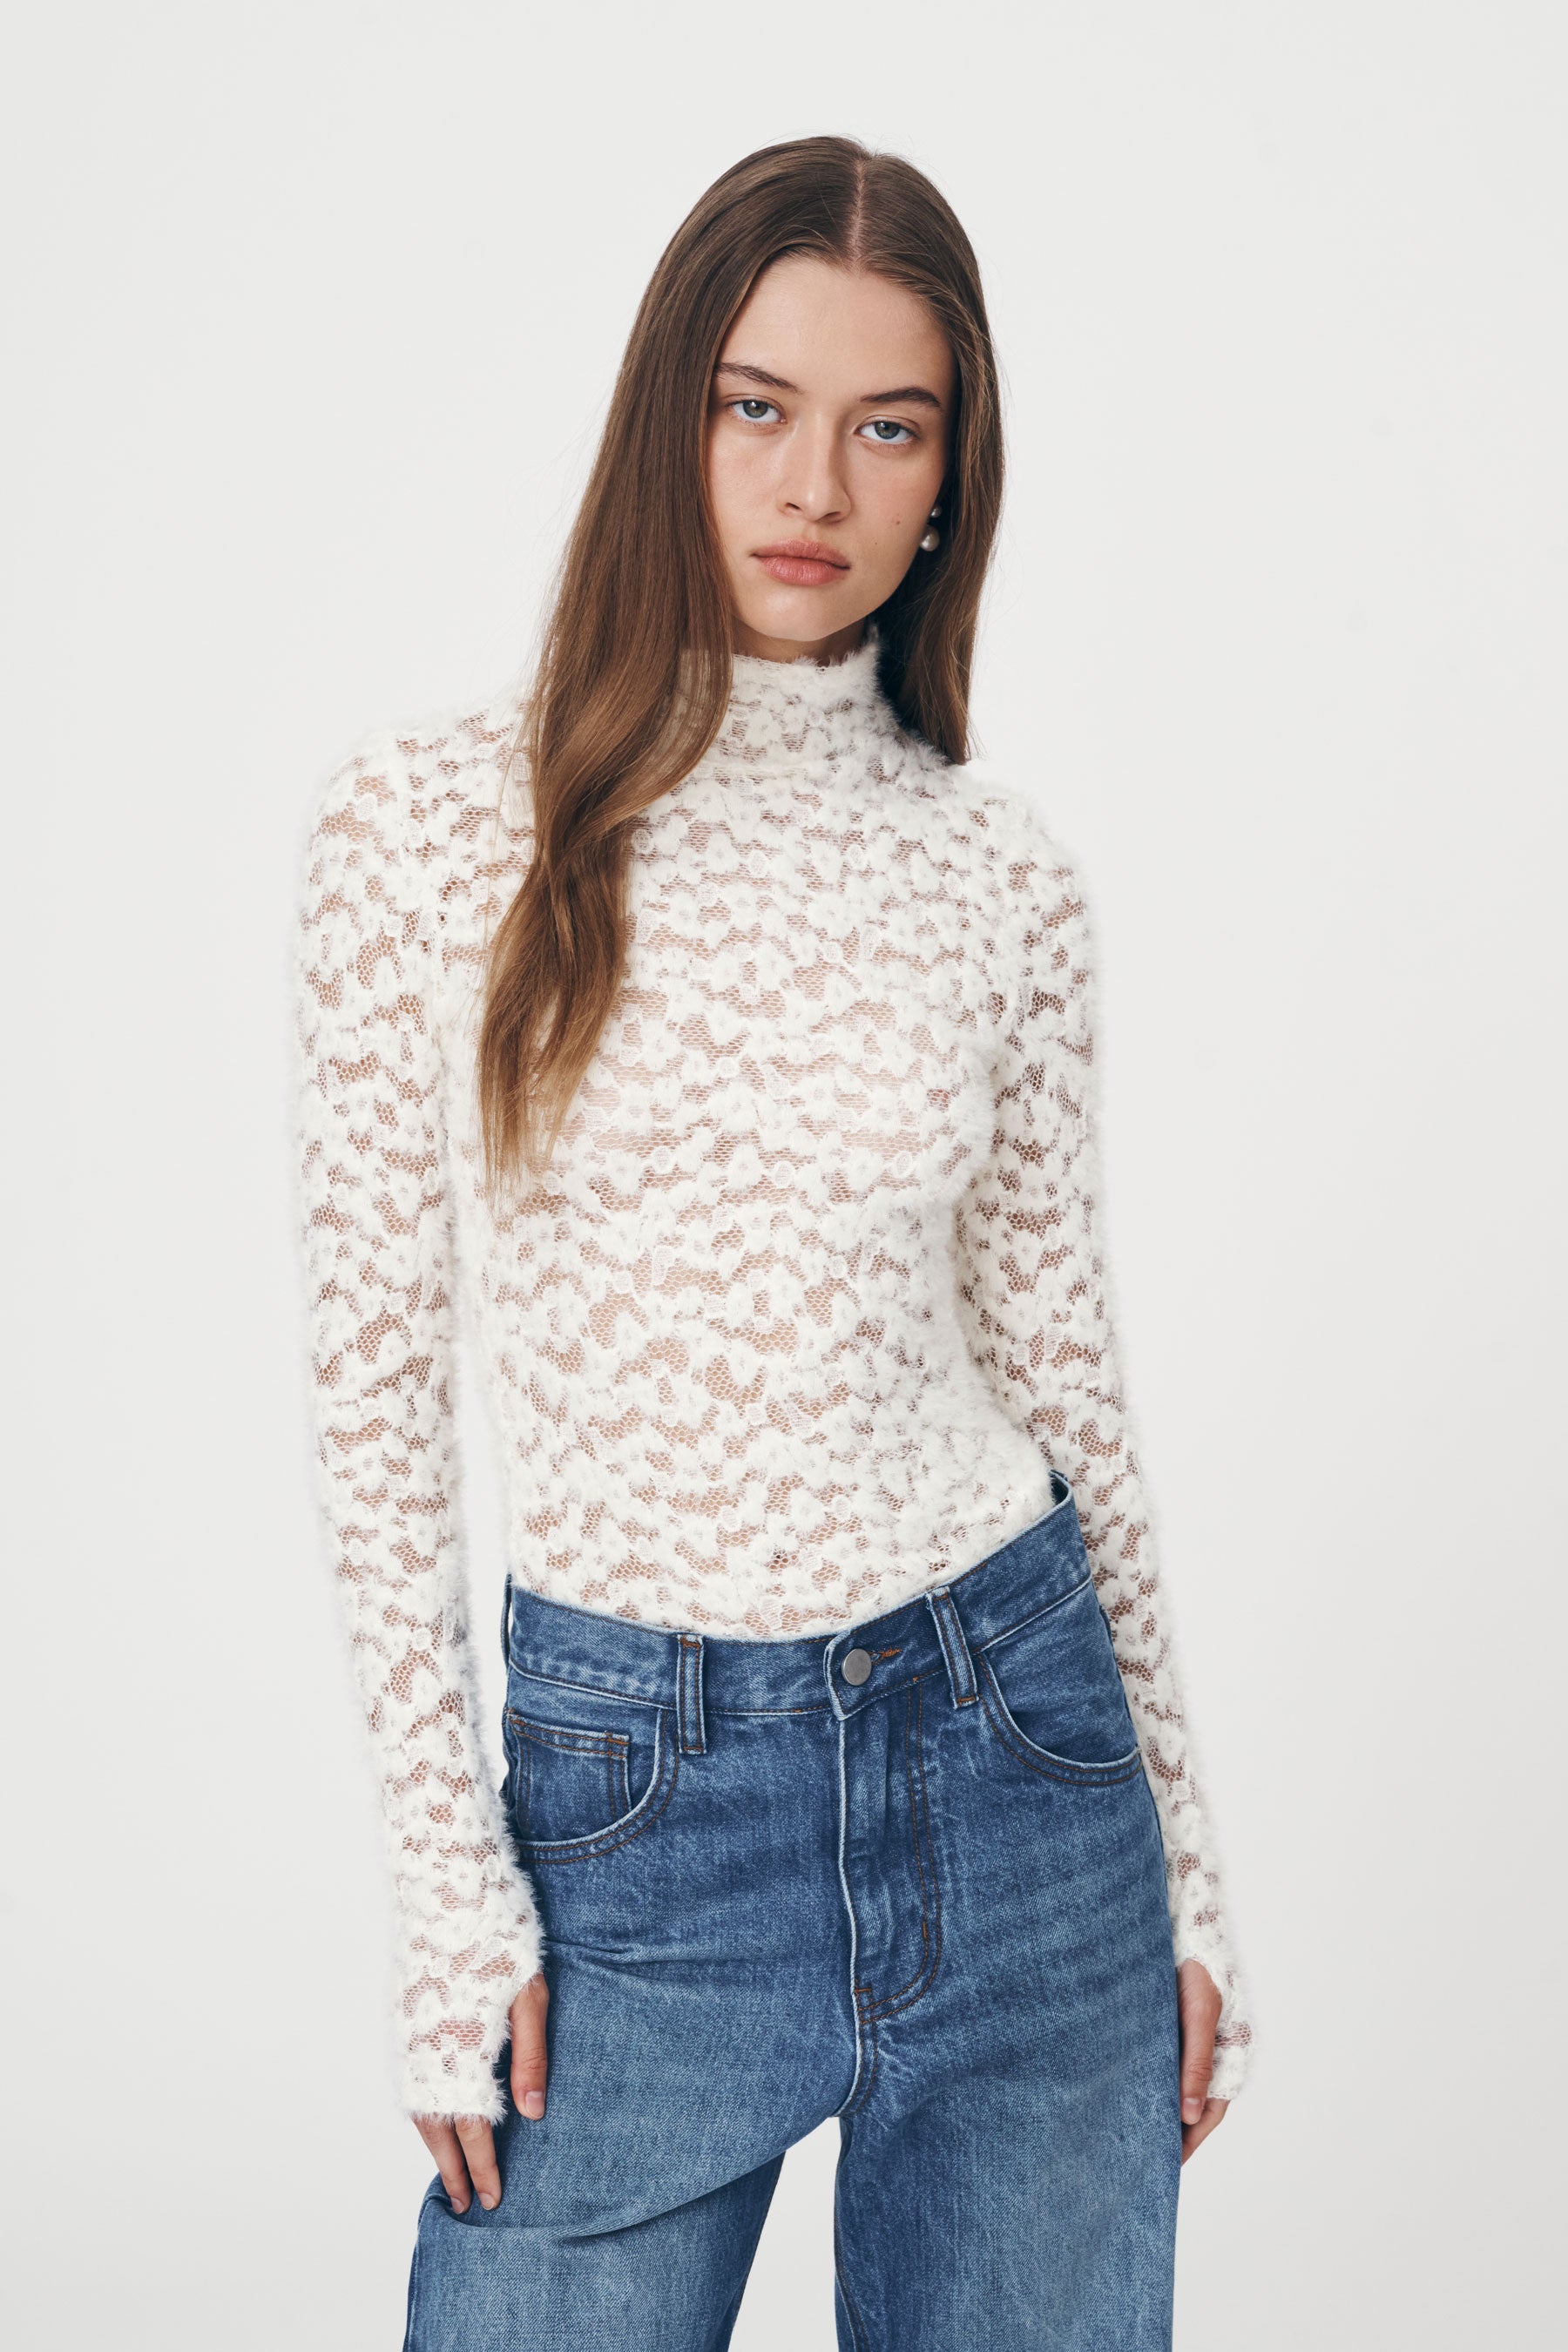 Galo Fuzzy Lace Top